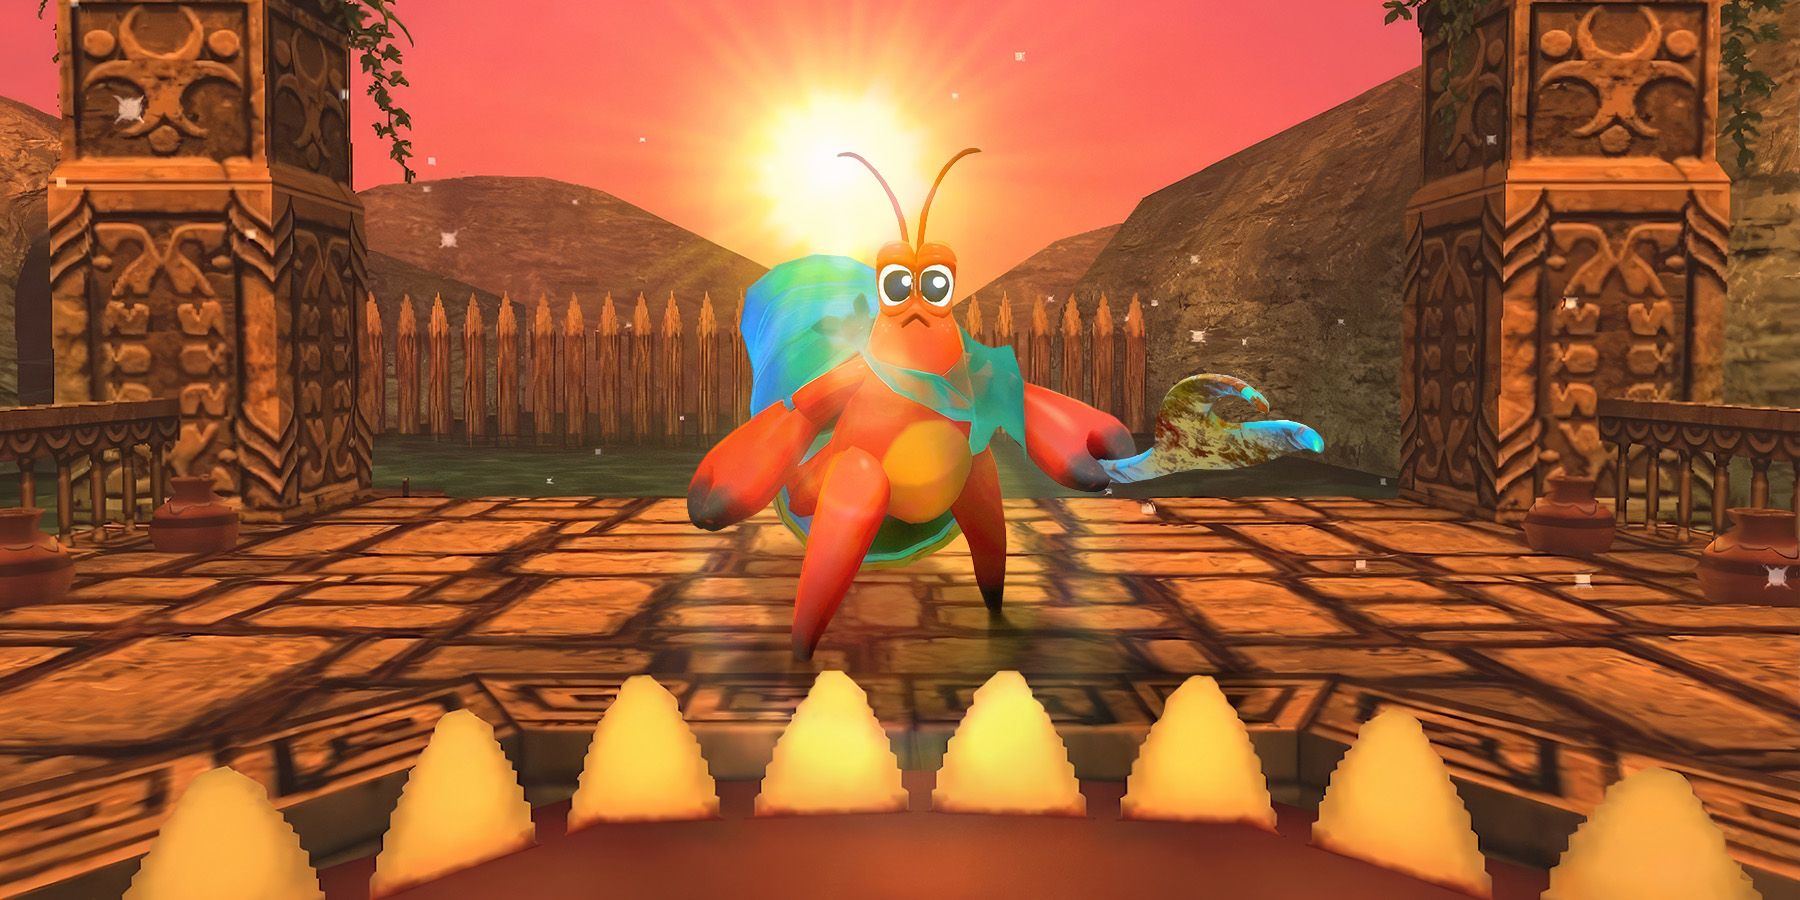 another-crabs-treasure-game-rant-advance-cut-a-level-similar-to-zelda-ocarina-of-time-thumb